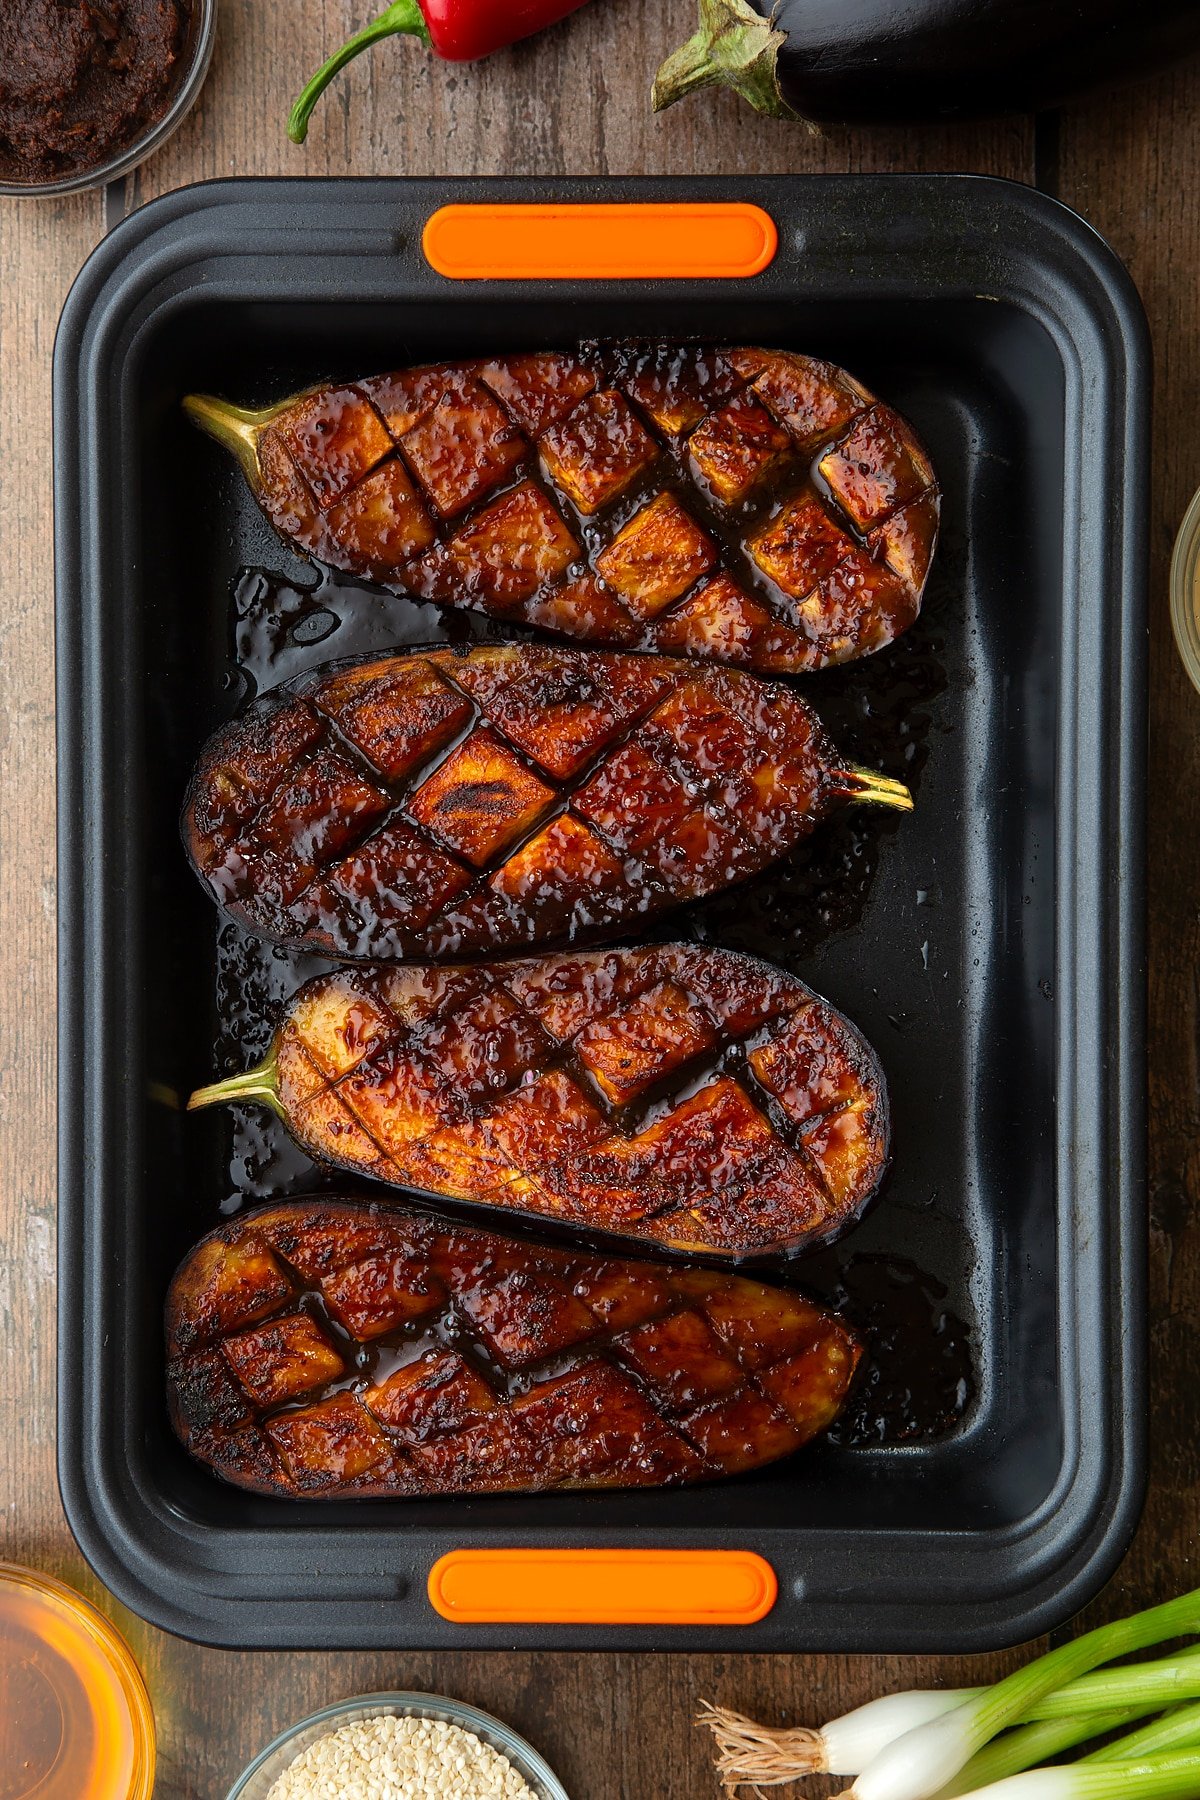 Aubergine halved covered with a miso glaze and grilled. Ingredients to make miso aubergine surround the tray.